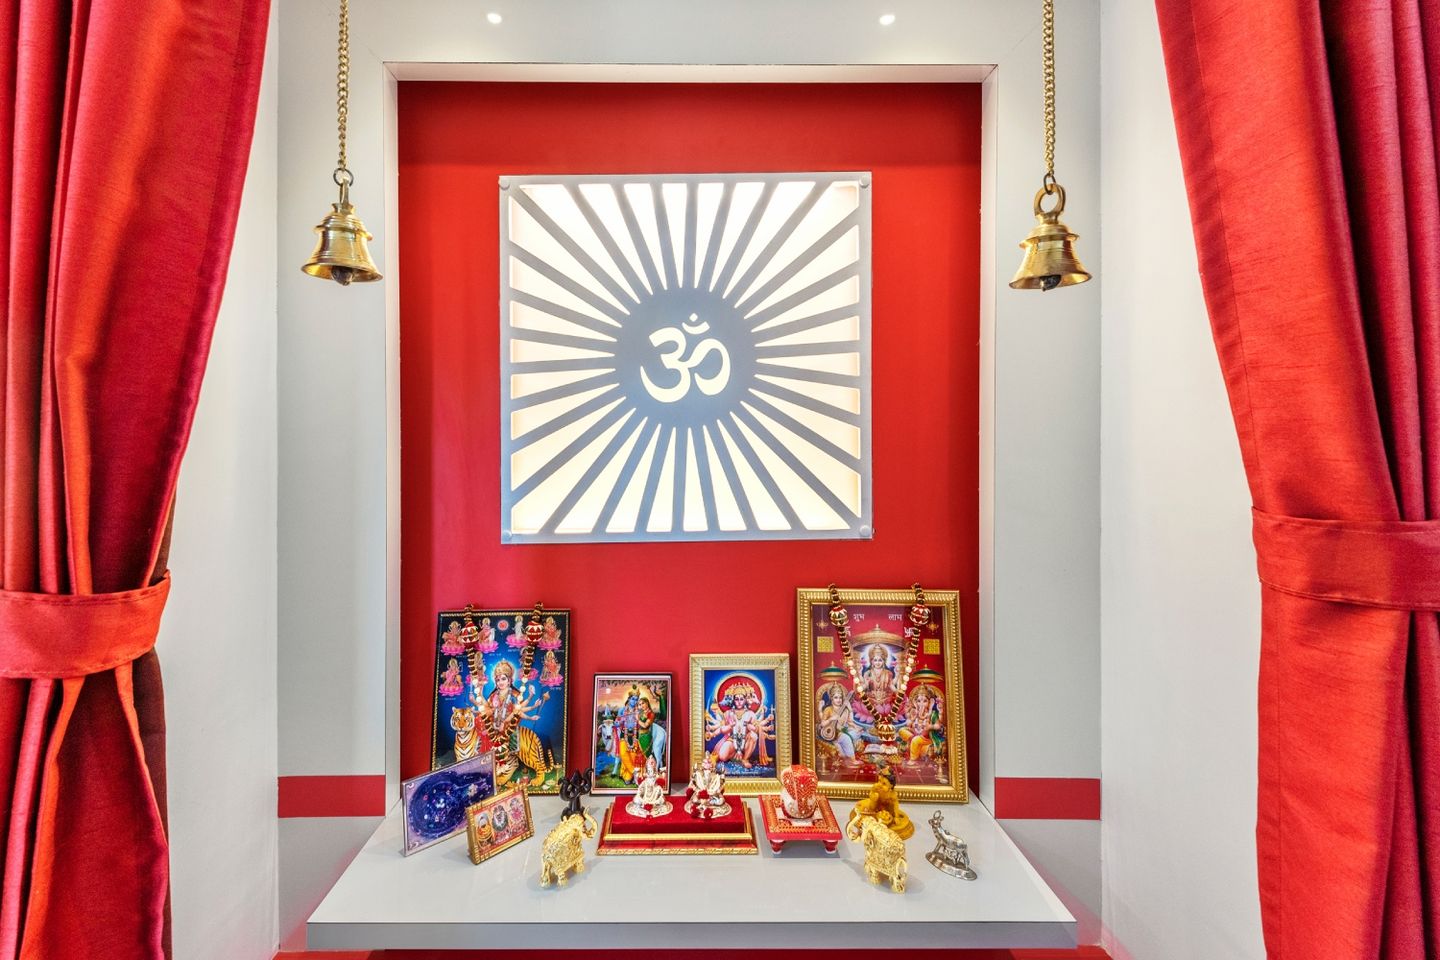 6x2x8 Ft Mandir Design With Frosty White and Cardinal Red Base and Wall Units - Livspace